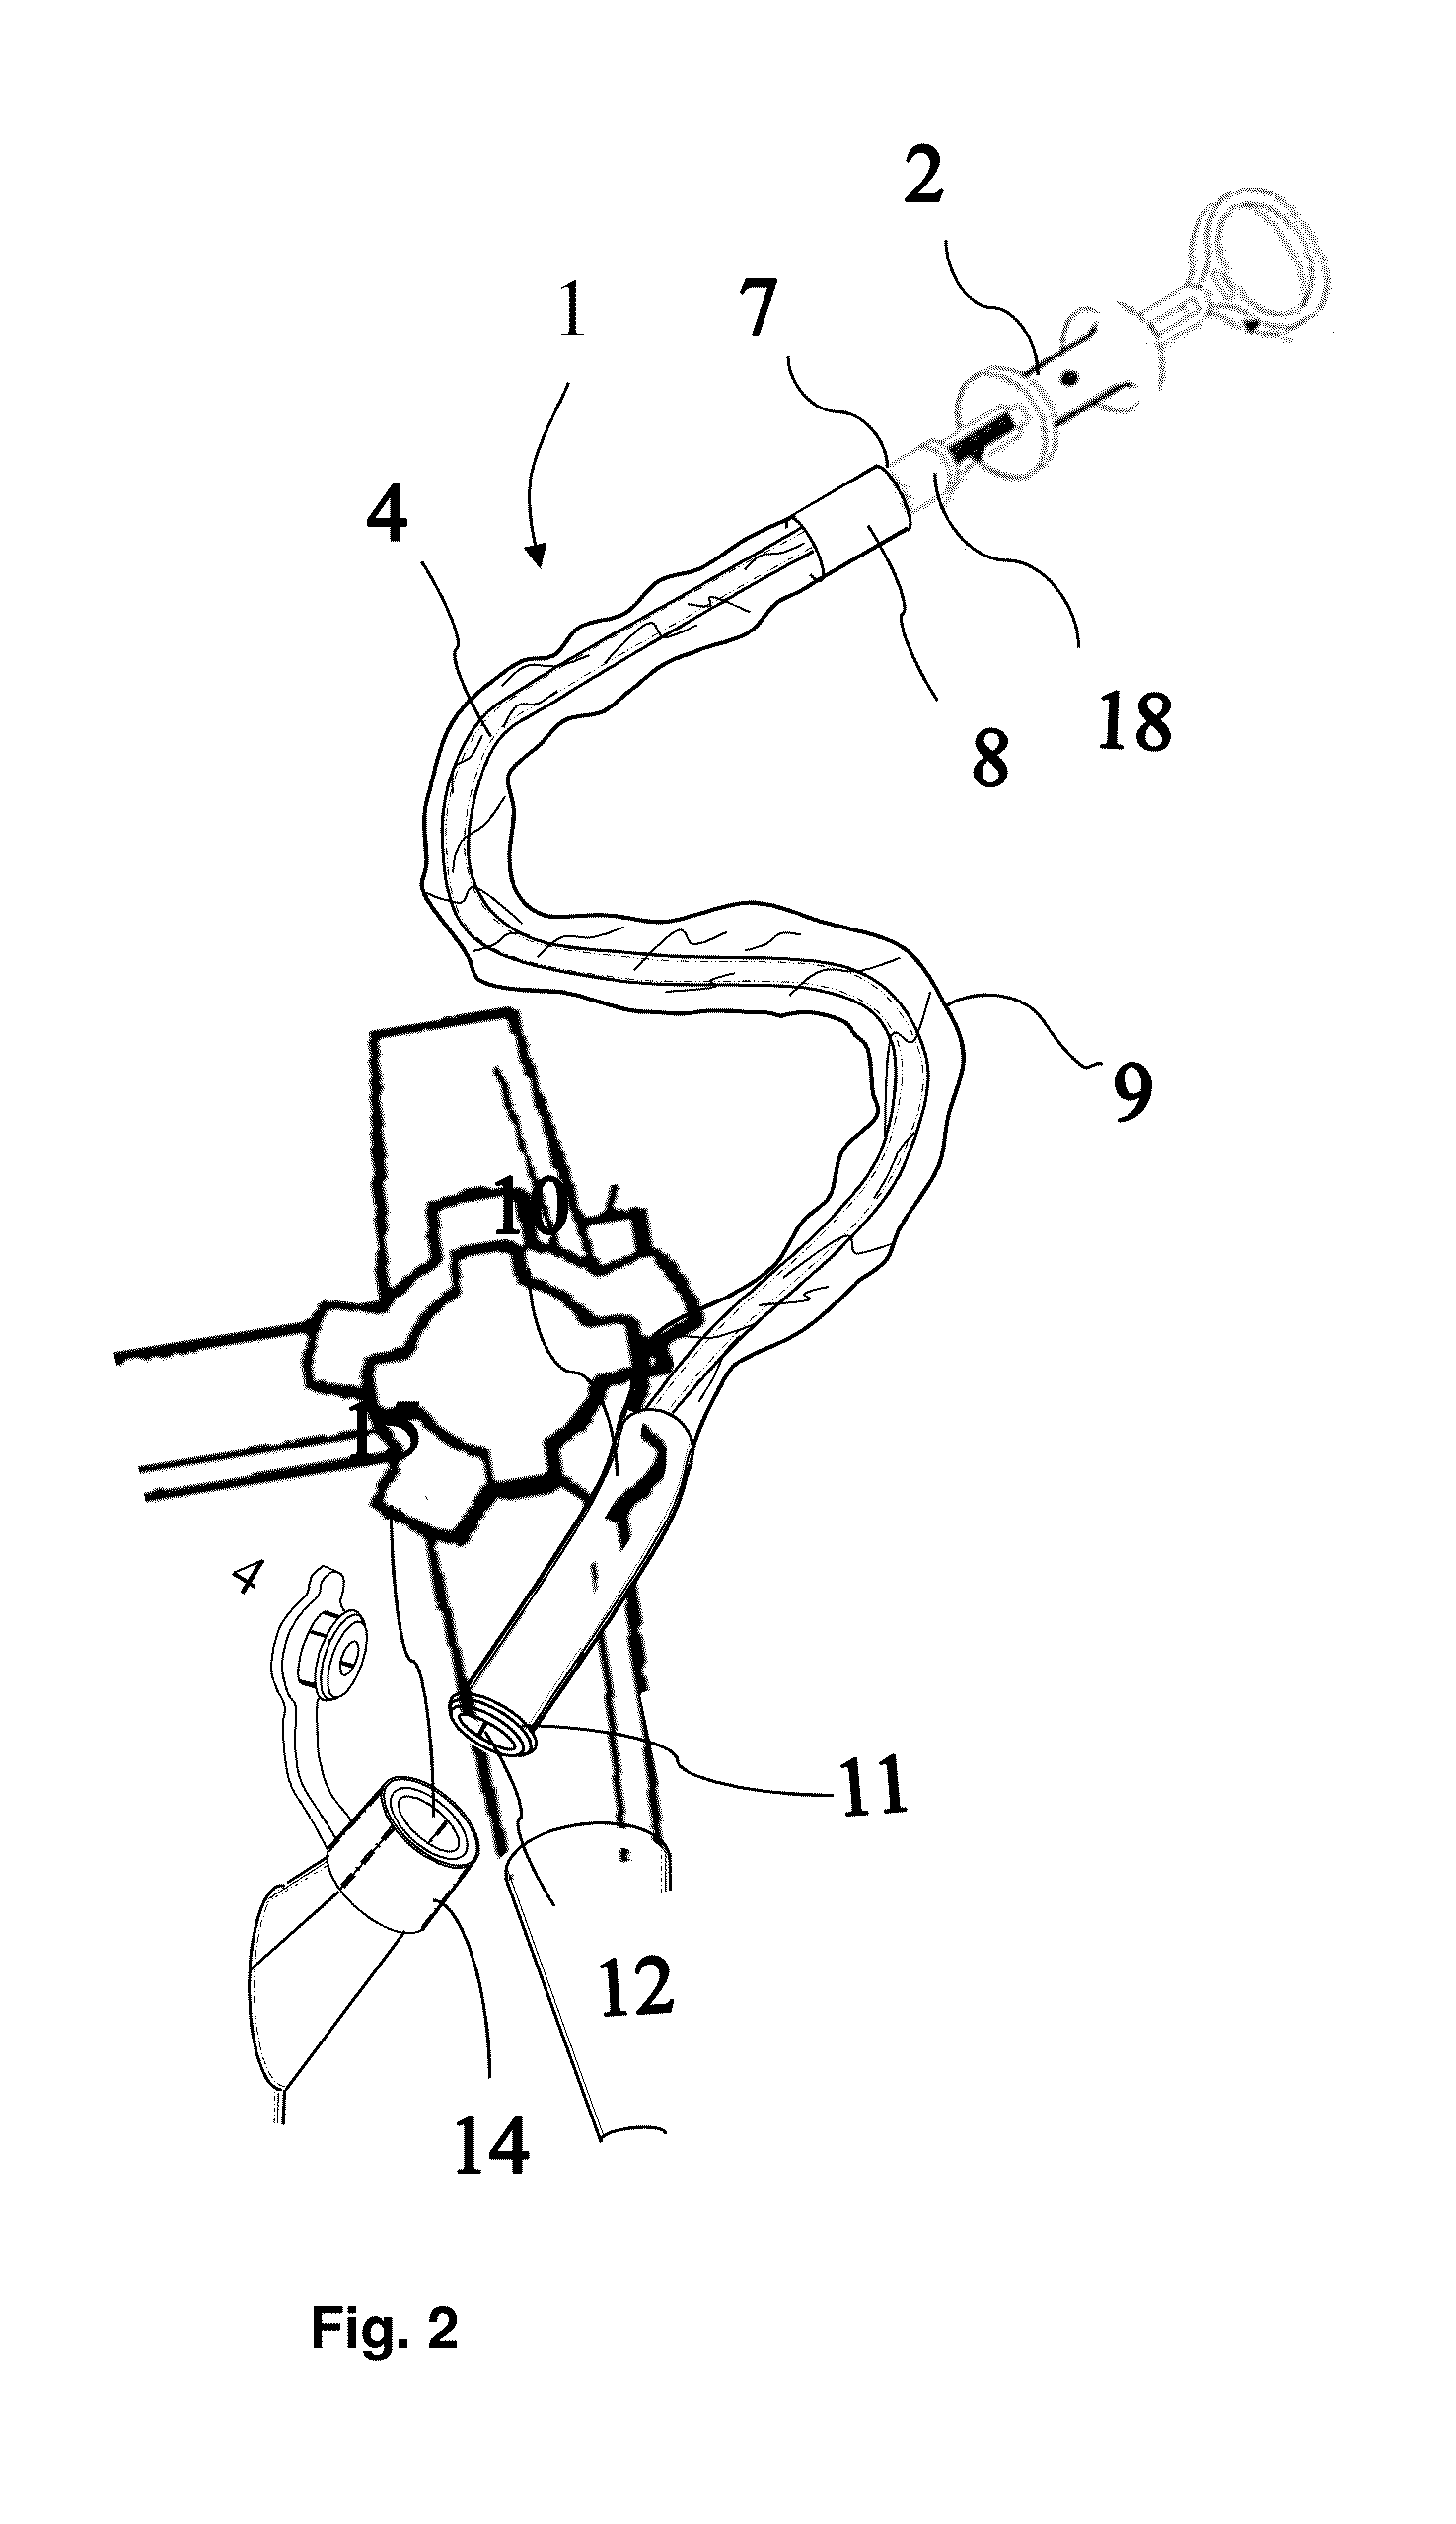 Method and Device for Improved Hygiene During using Endoscopic accessory tools